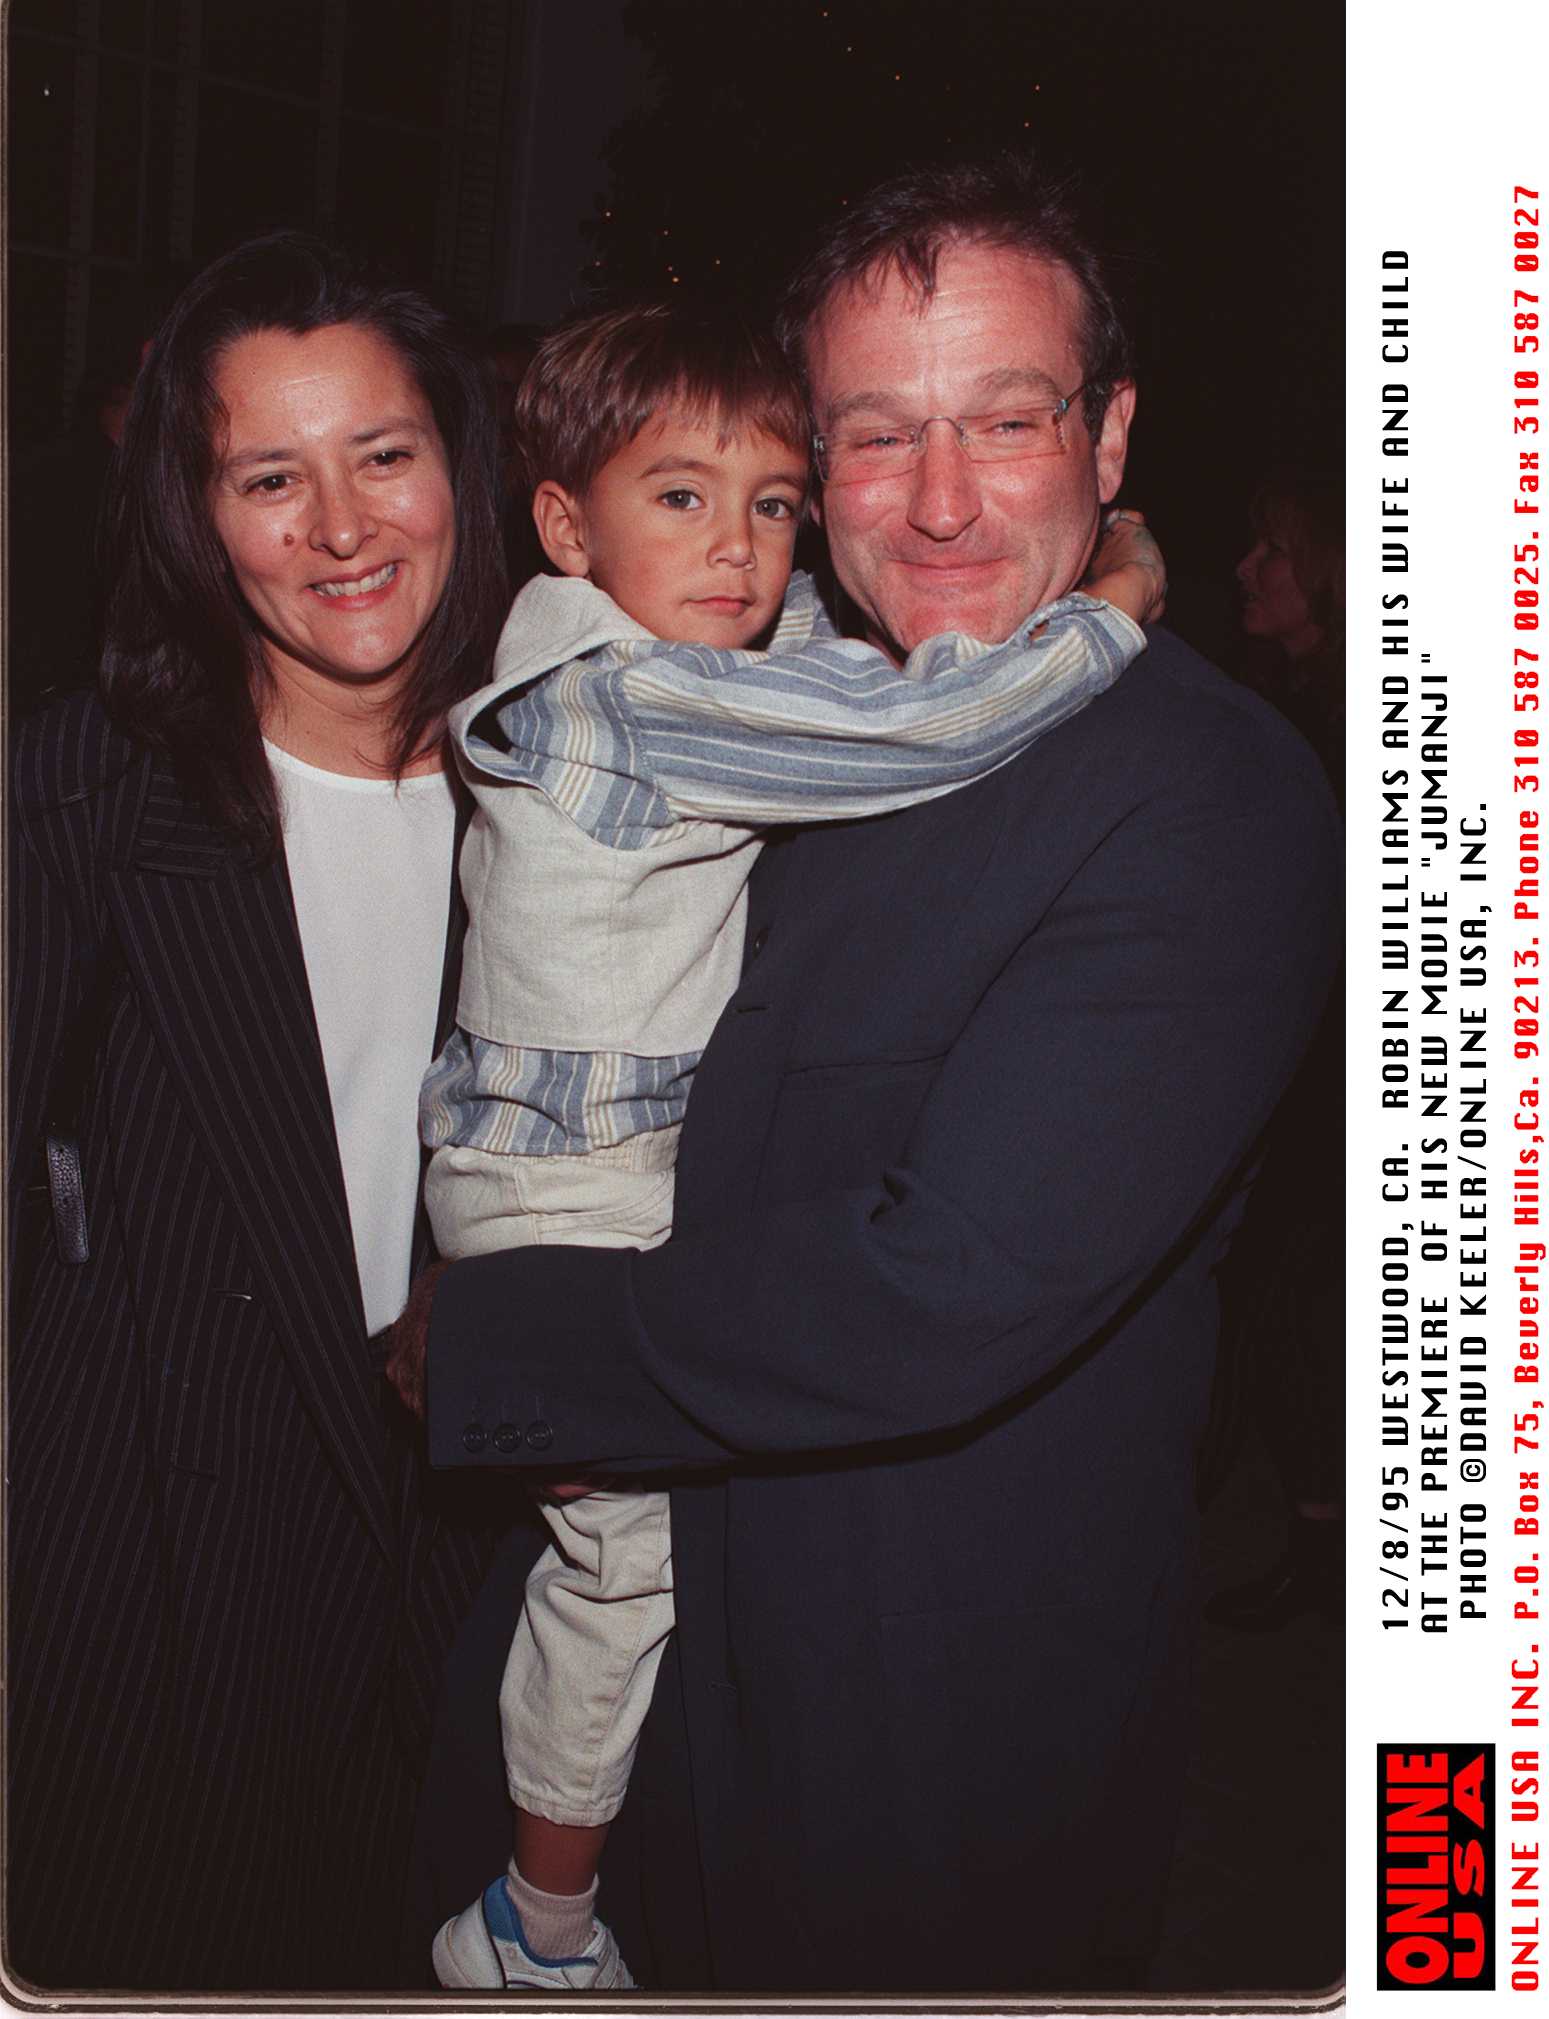 Robin Williams with his wife, Marsha Garces, and their son, Cody at the premiere of his new movie, "Jumanji" on December 8, 1995, in Westwood, California. | Source: Getty Images